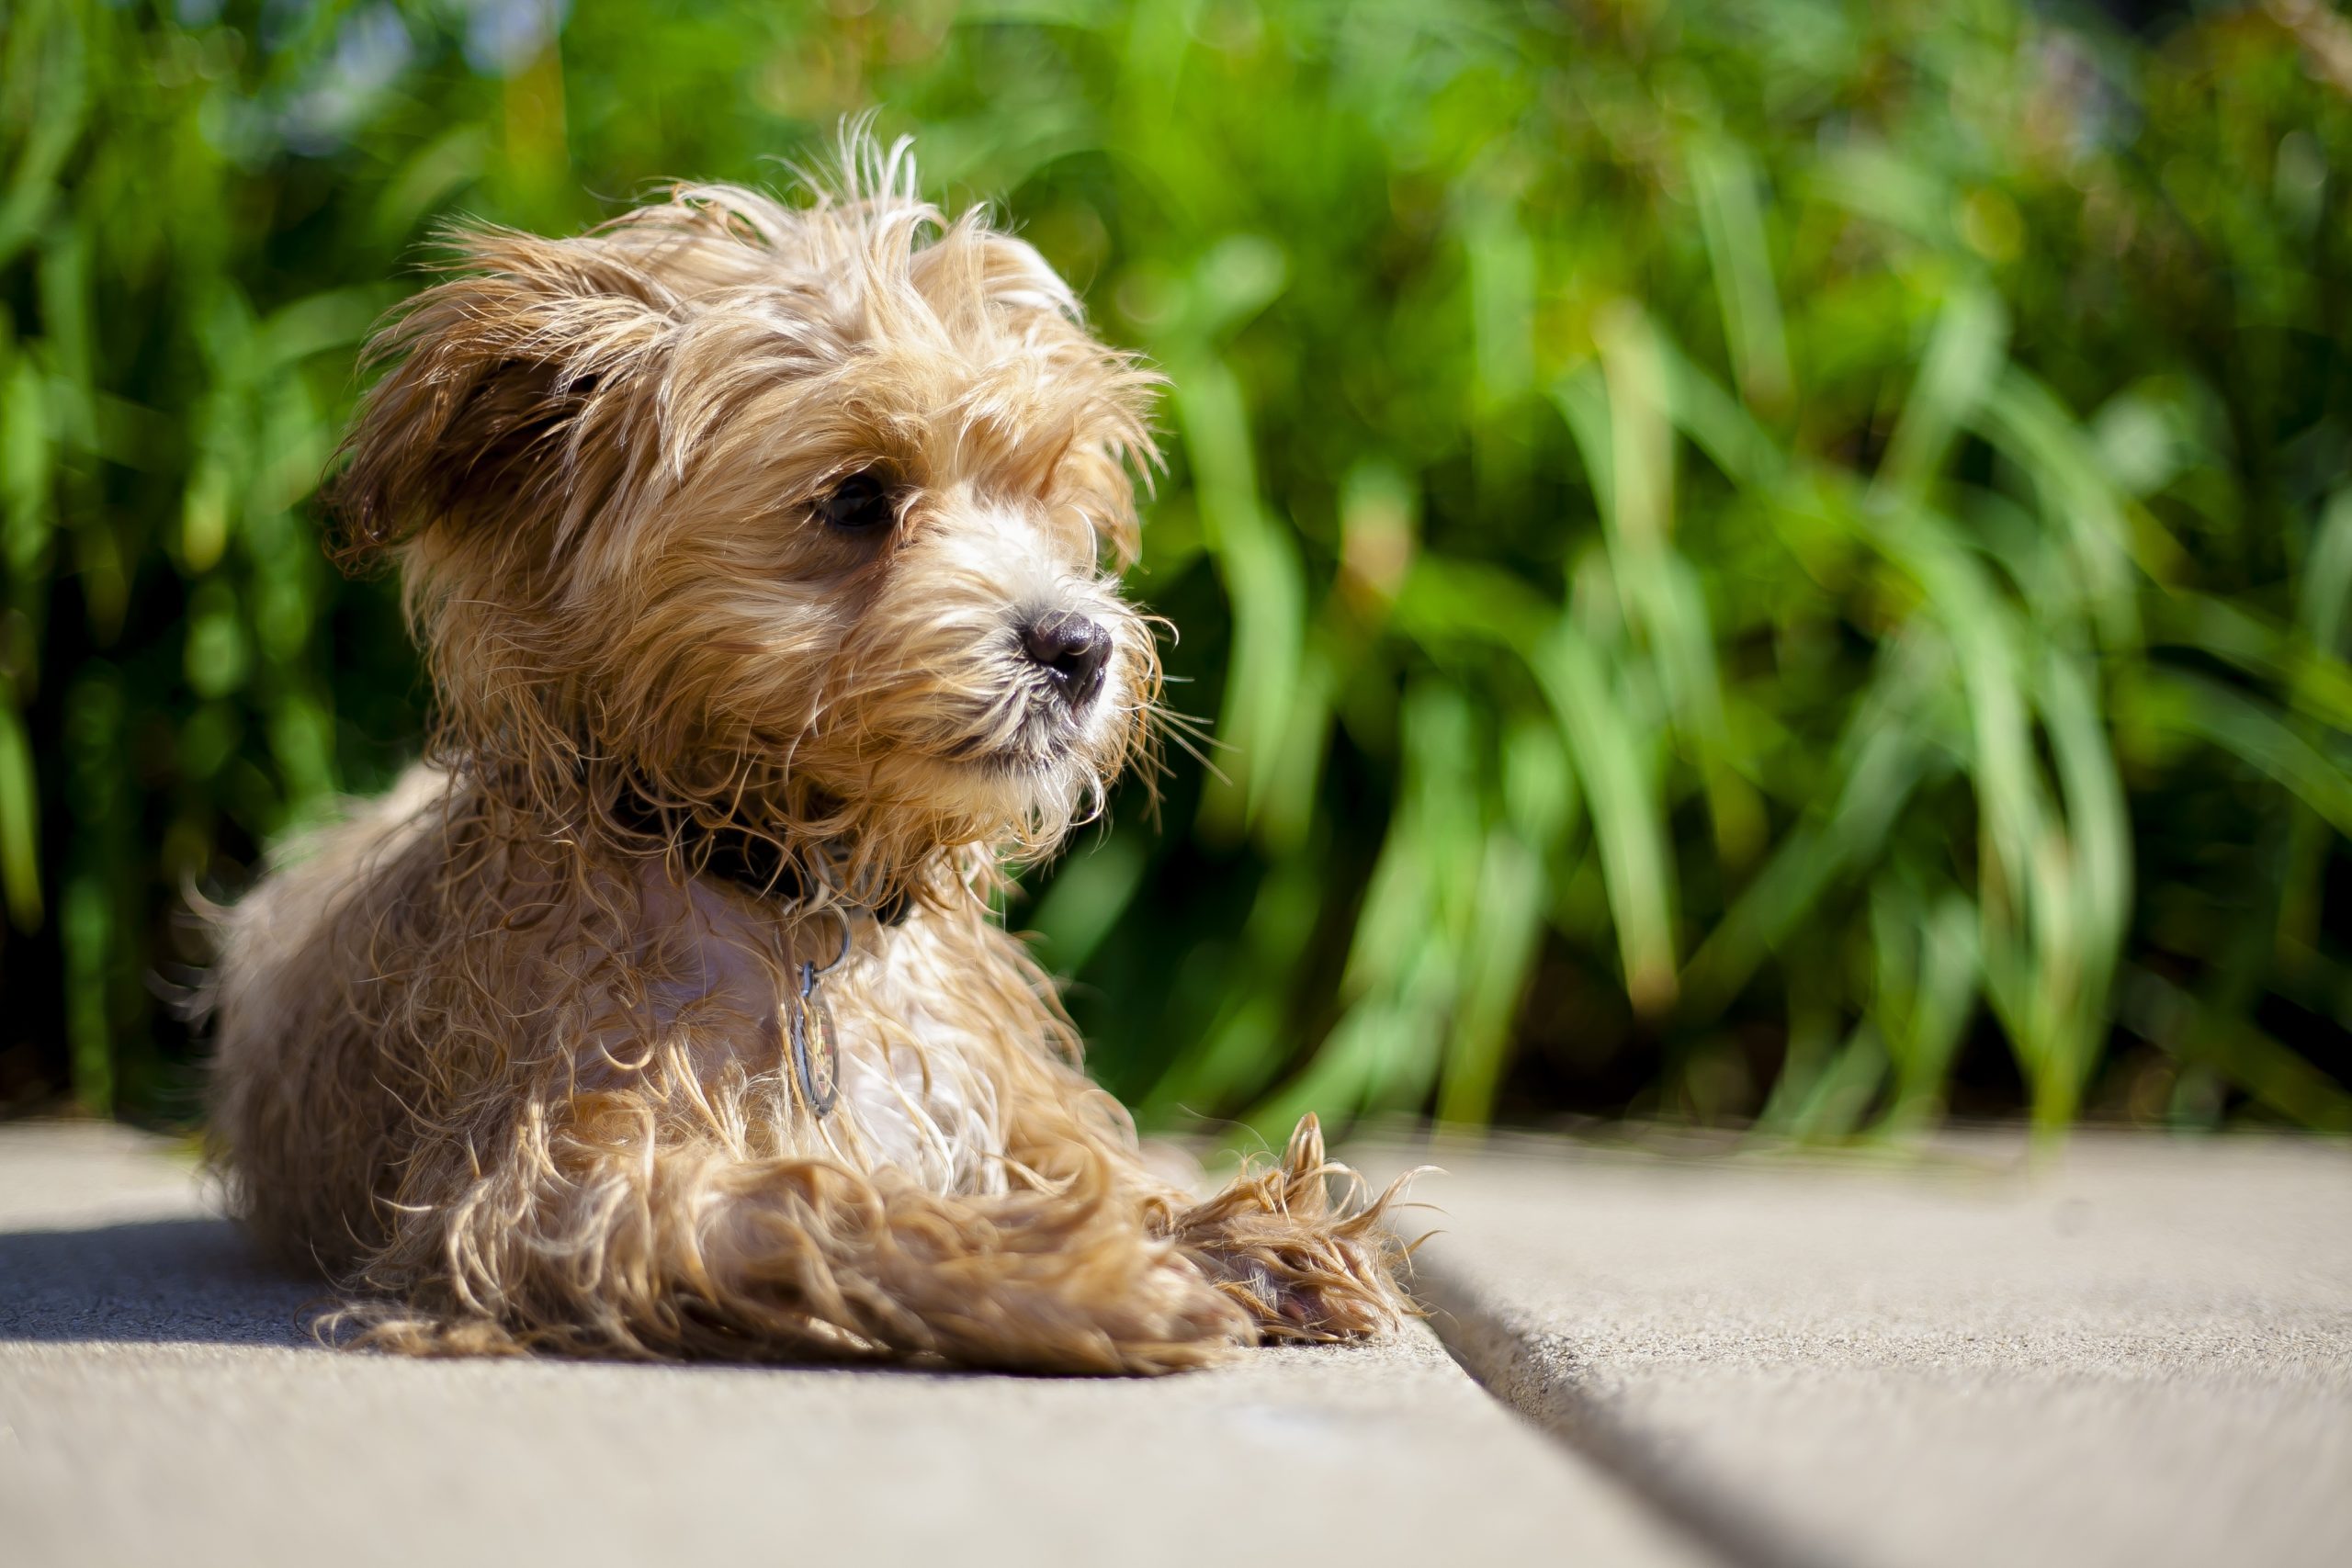 What Are The Downsides Of A Maltipoo That Every Future Owner Needs To Be Aware Of